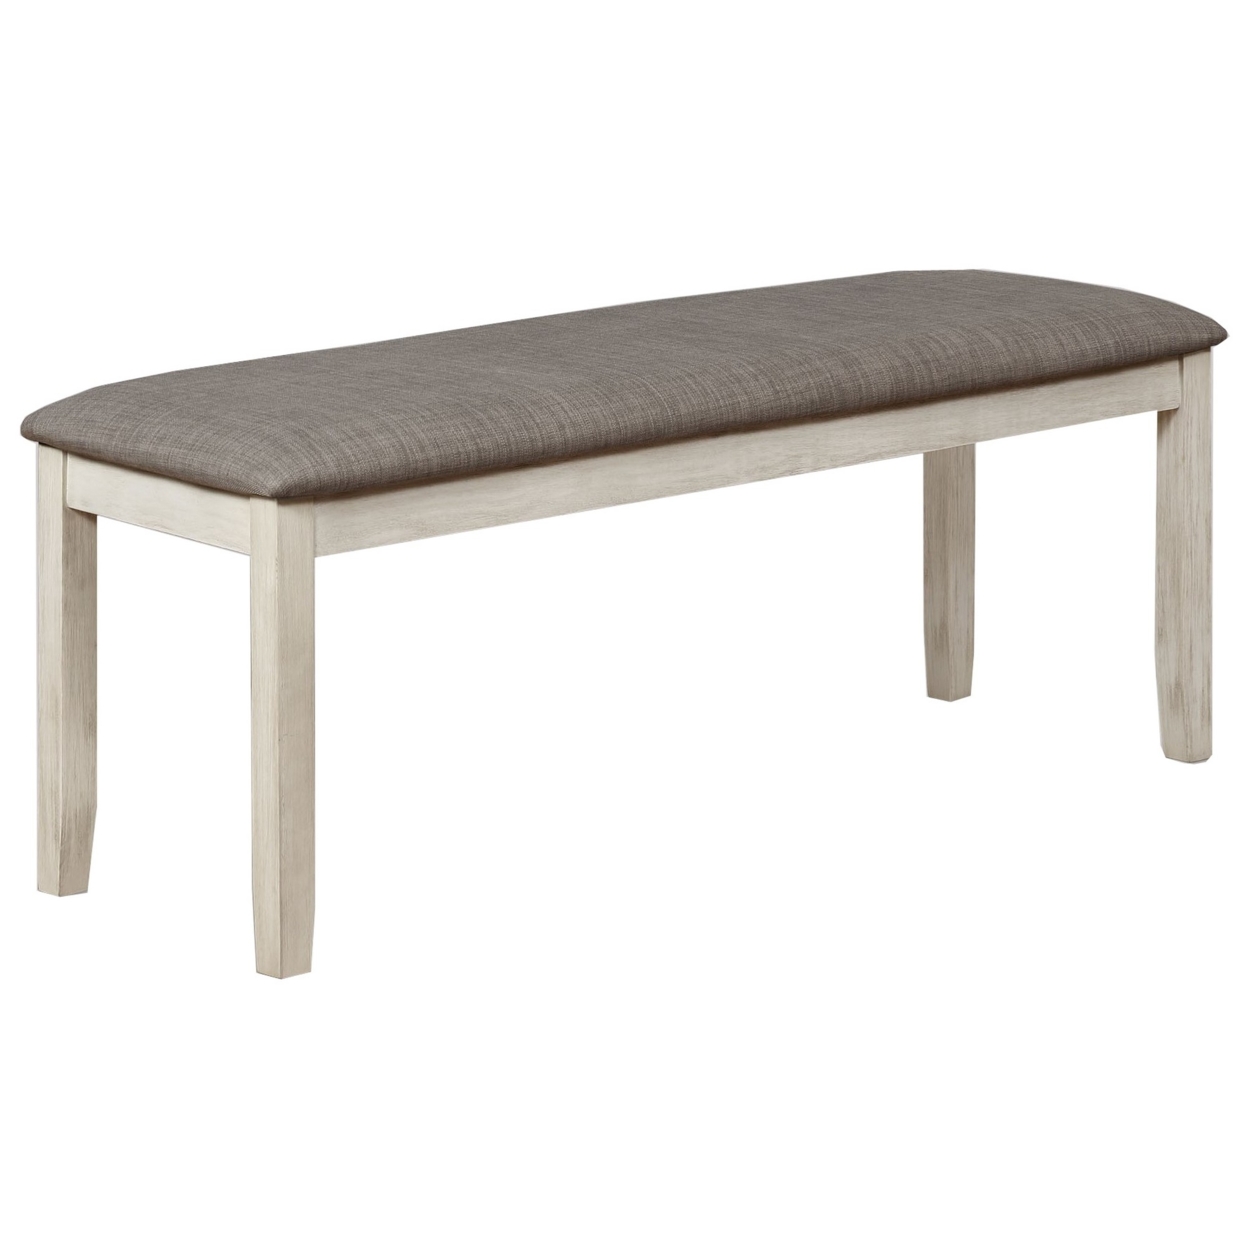 Wooden Bench With Fabric Upholstered Seat And Chamfered Legs,White And Gray- Saltoro Sherpi